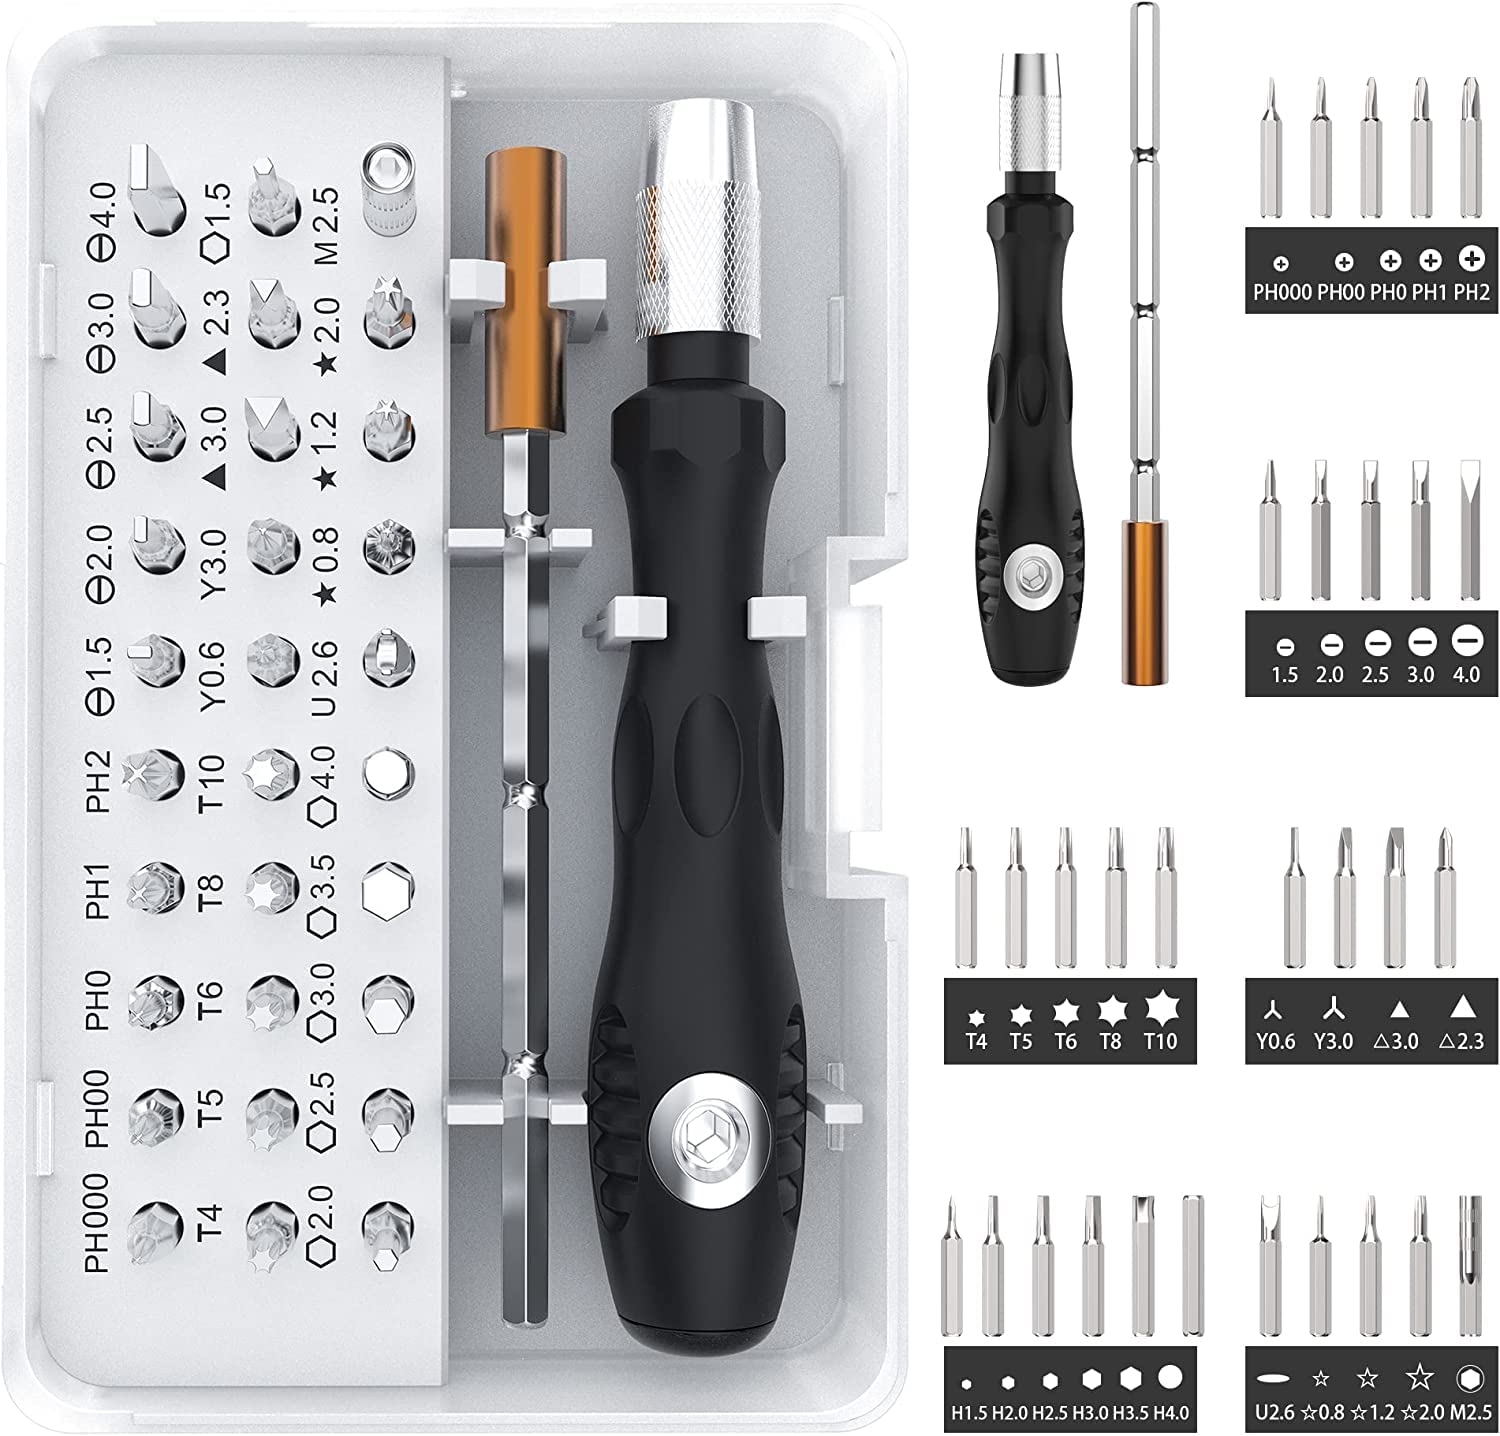 32 In 1 Small Screwdriver Set, Mini Magnetic Set Contains 30 Bits Repair Tool Kit for Watch,Toys,Laptop,Phones